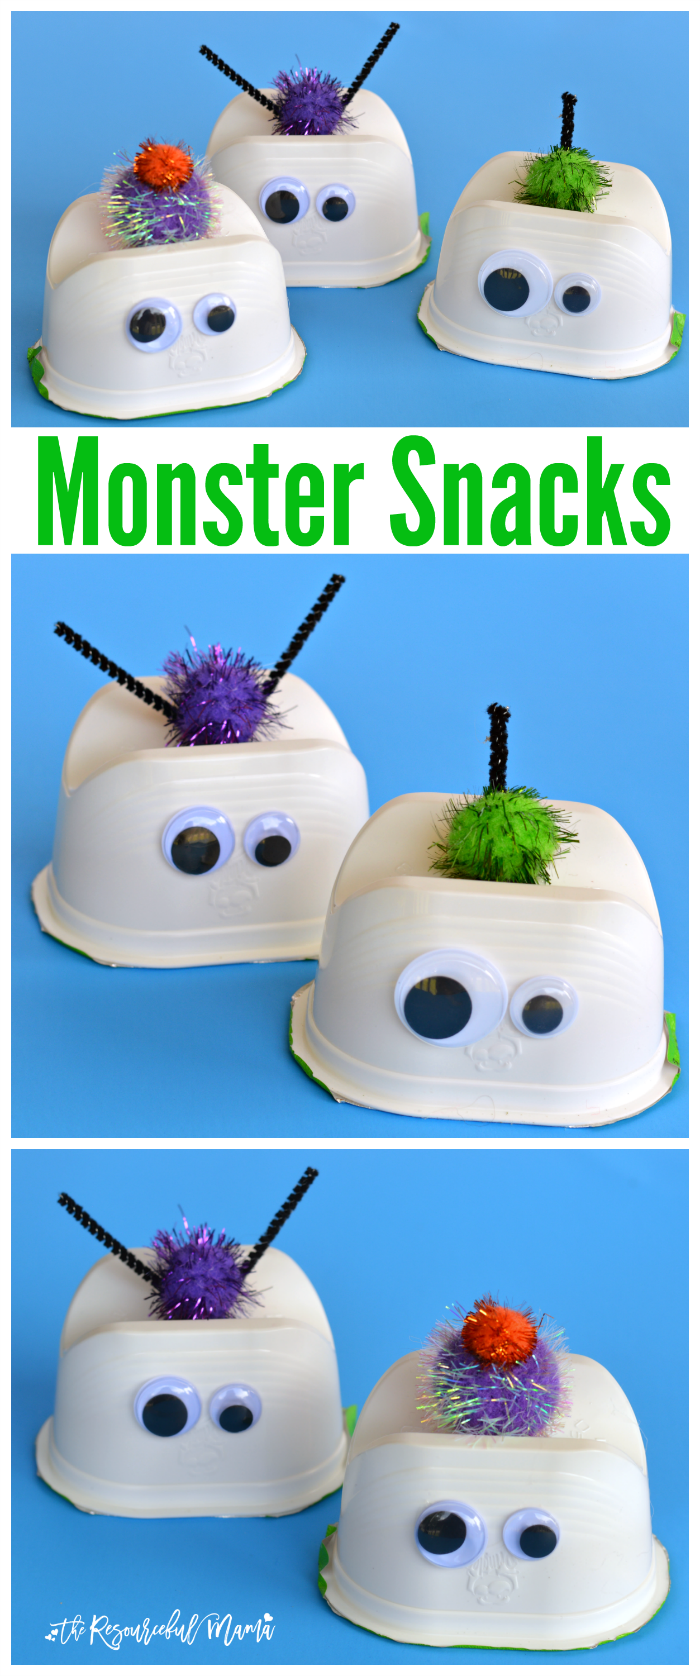 These wacky monster snacks are so fun, versatile, and creative! They work great for Halloween, a monster them, or just for fun. 